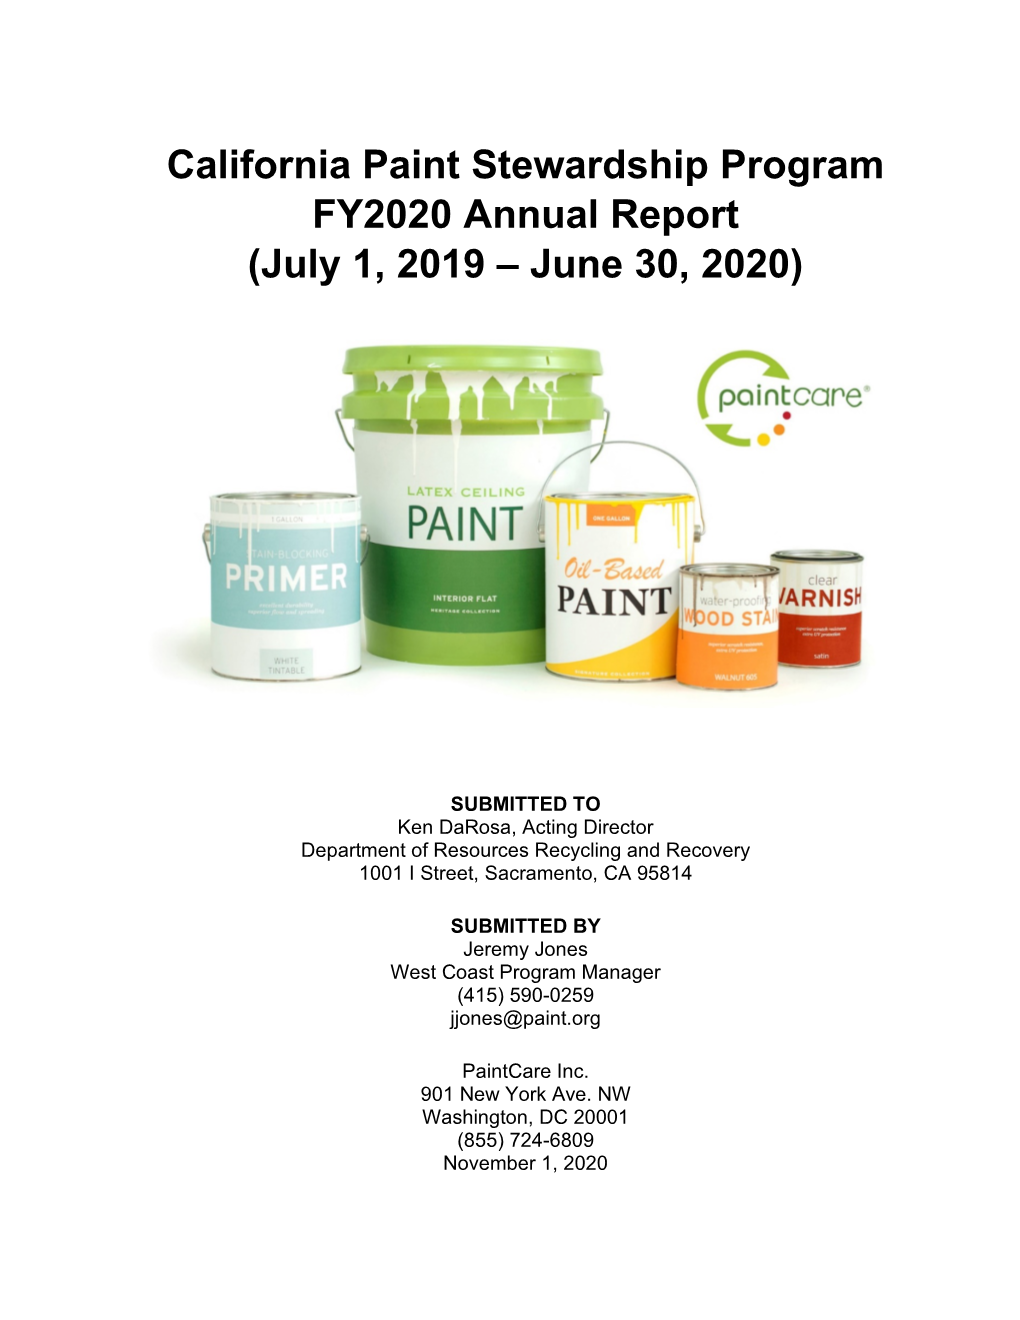 Paintcare's Year 8 Annual Report